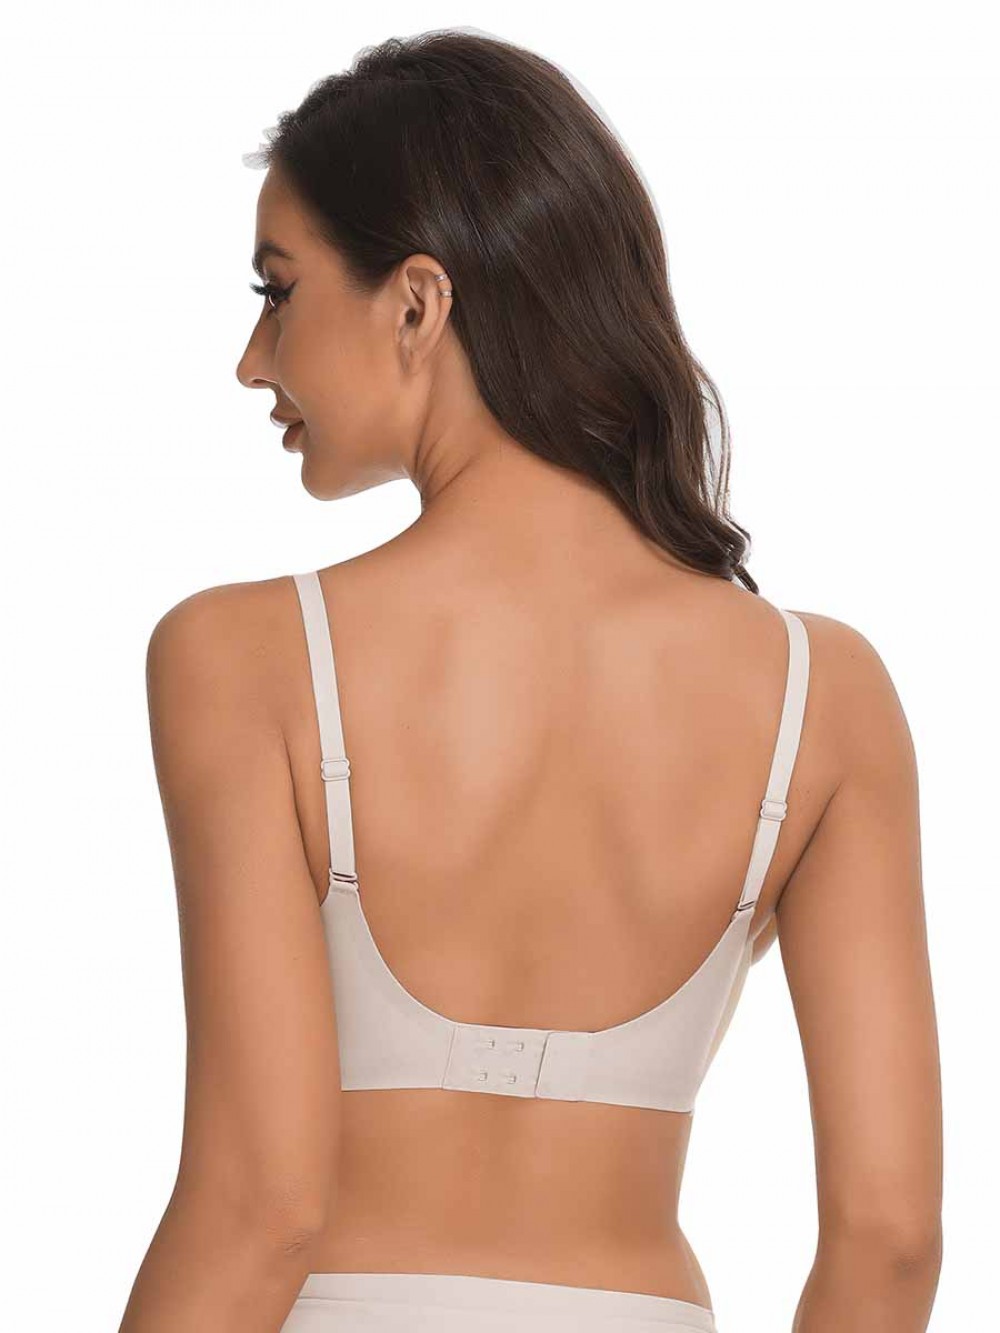 Nude High Quality Understated Luxurious Seamless Bra Superior Comfort